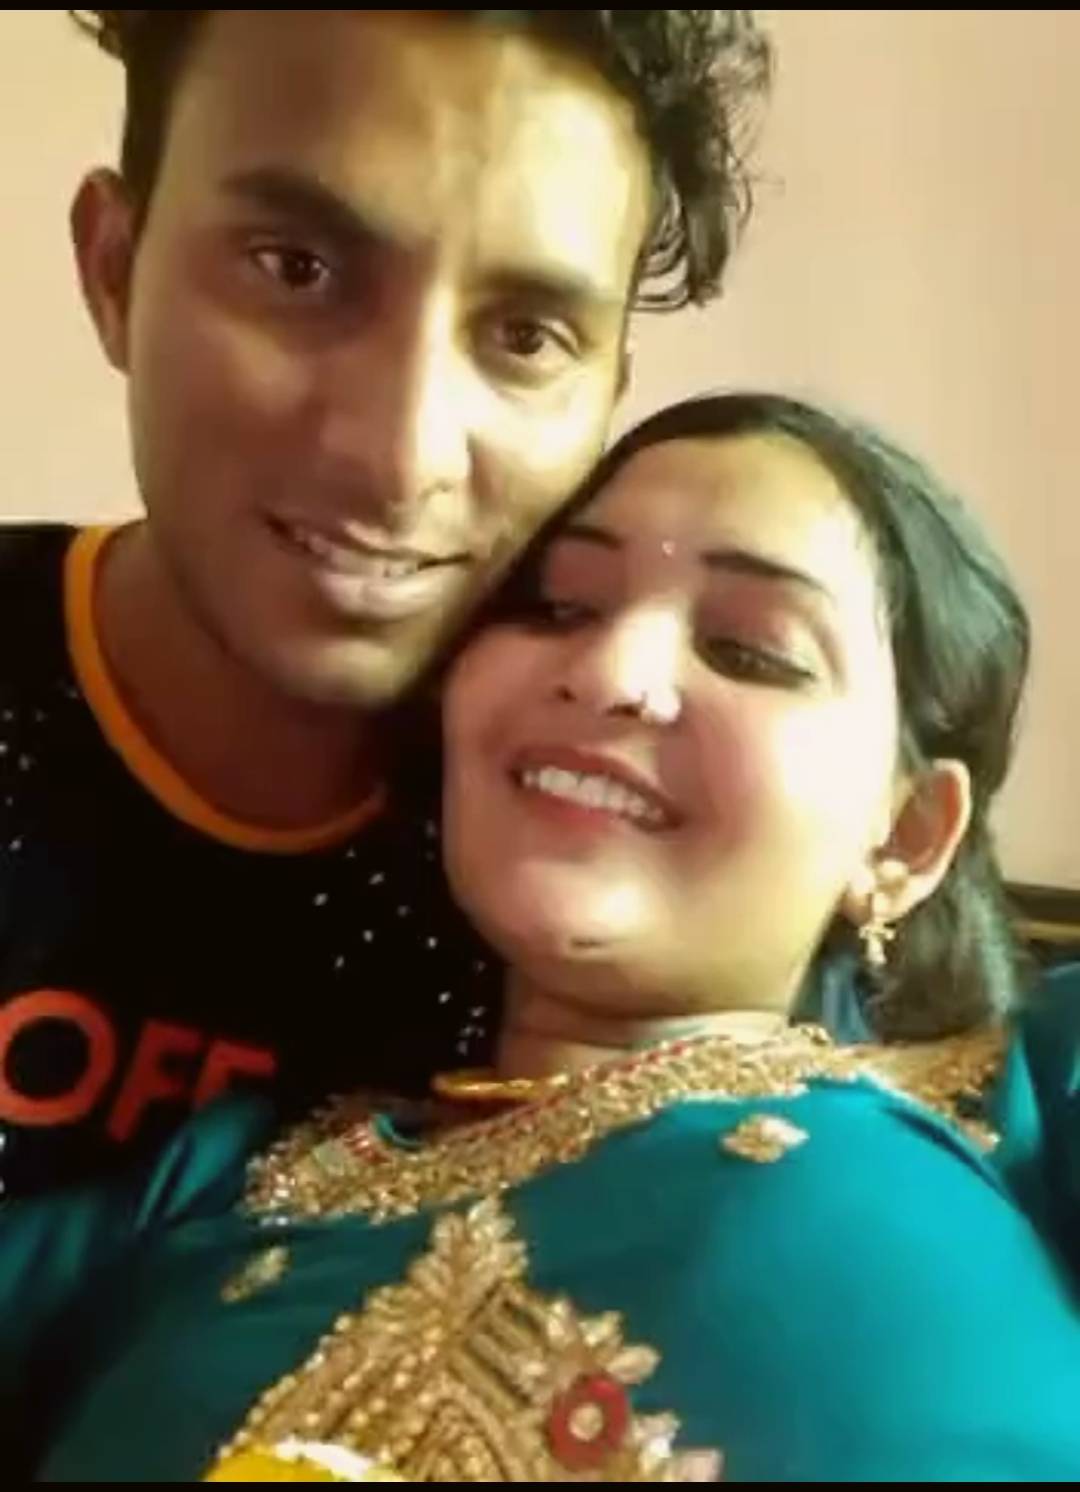 Desi Bhabhi With Devar 😍 Blowjob And Fuc💦💦 Link In Comment Scrolller